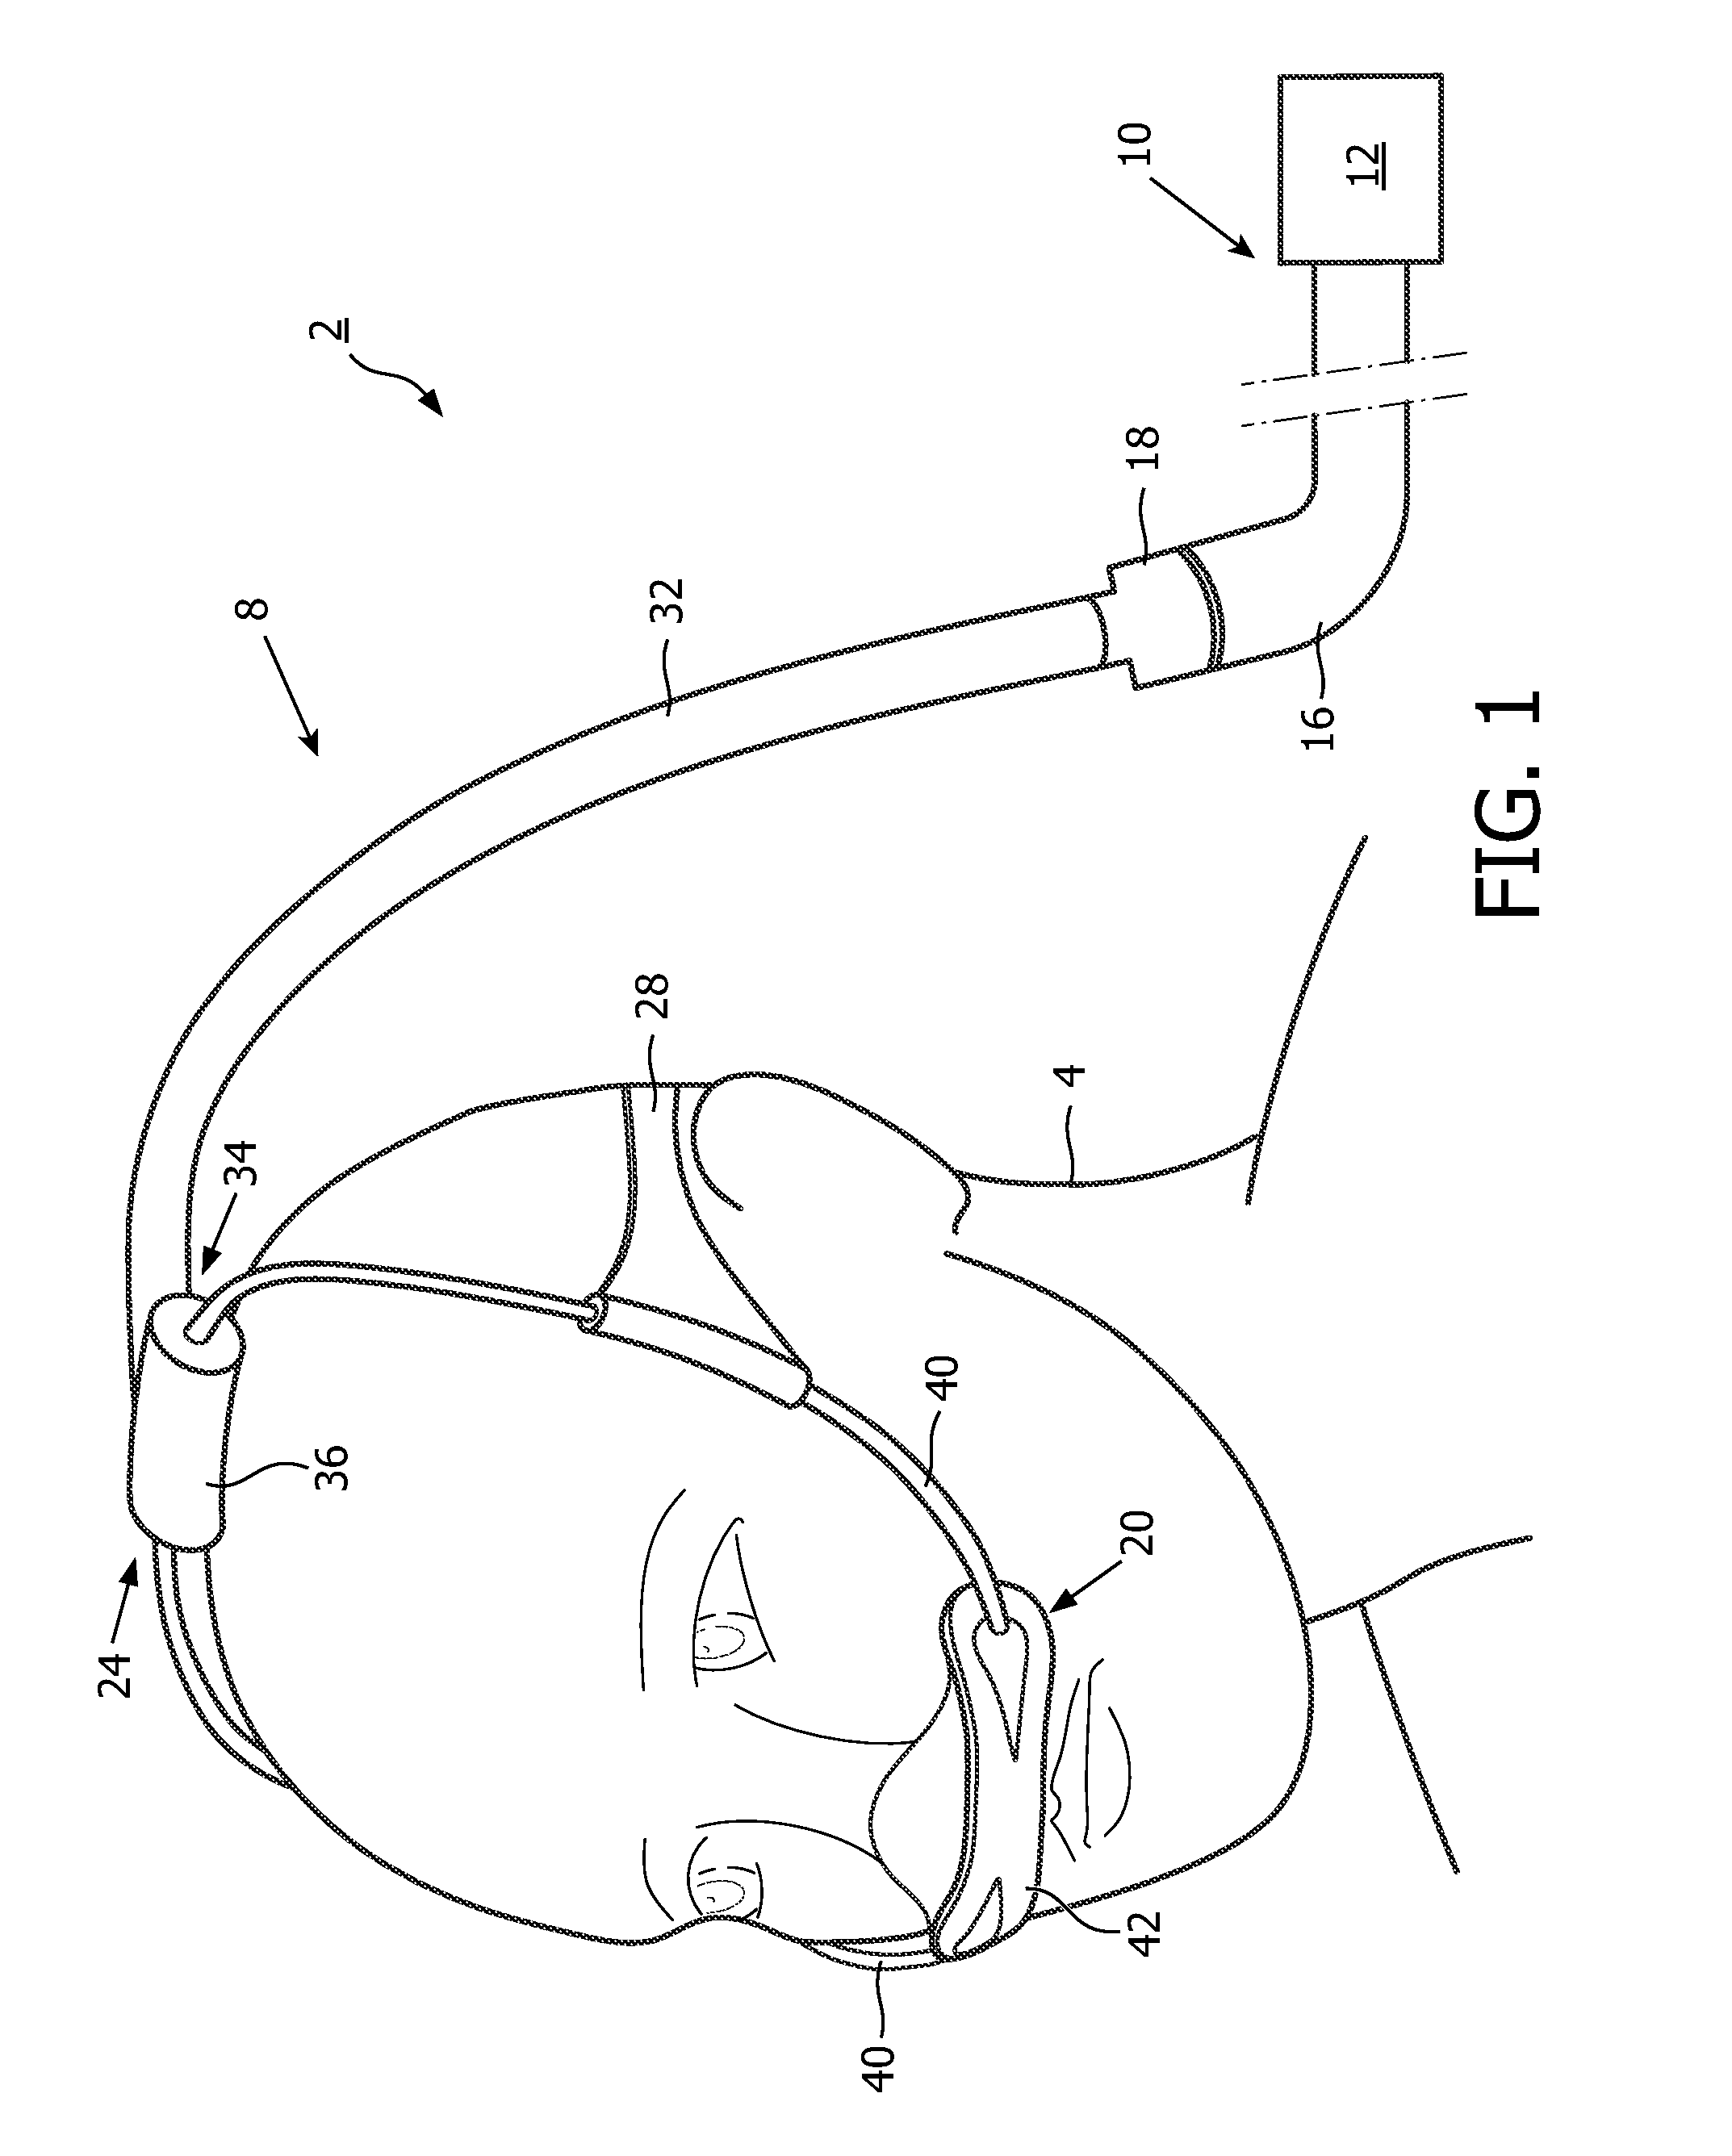 Sensor and valve integrated into a patient interface